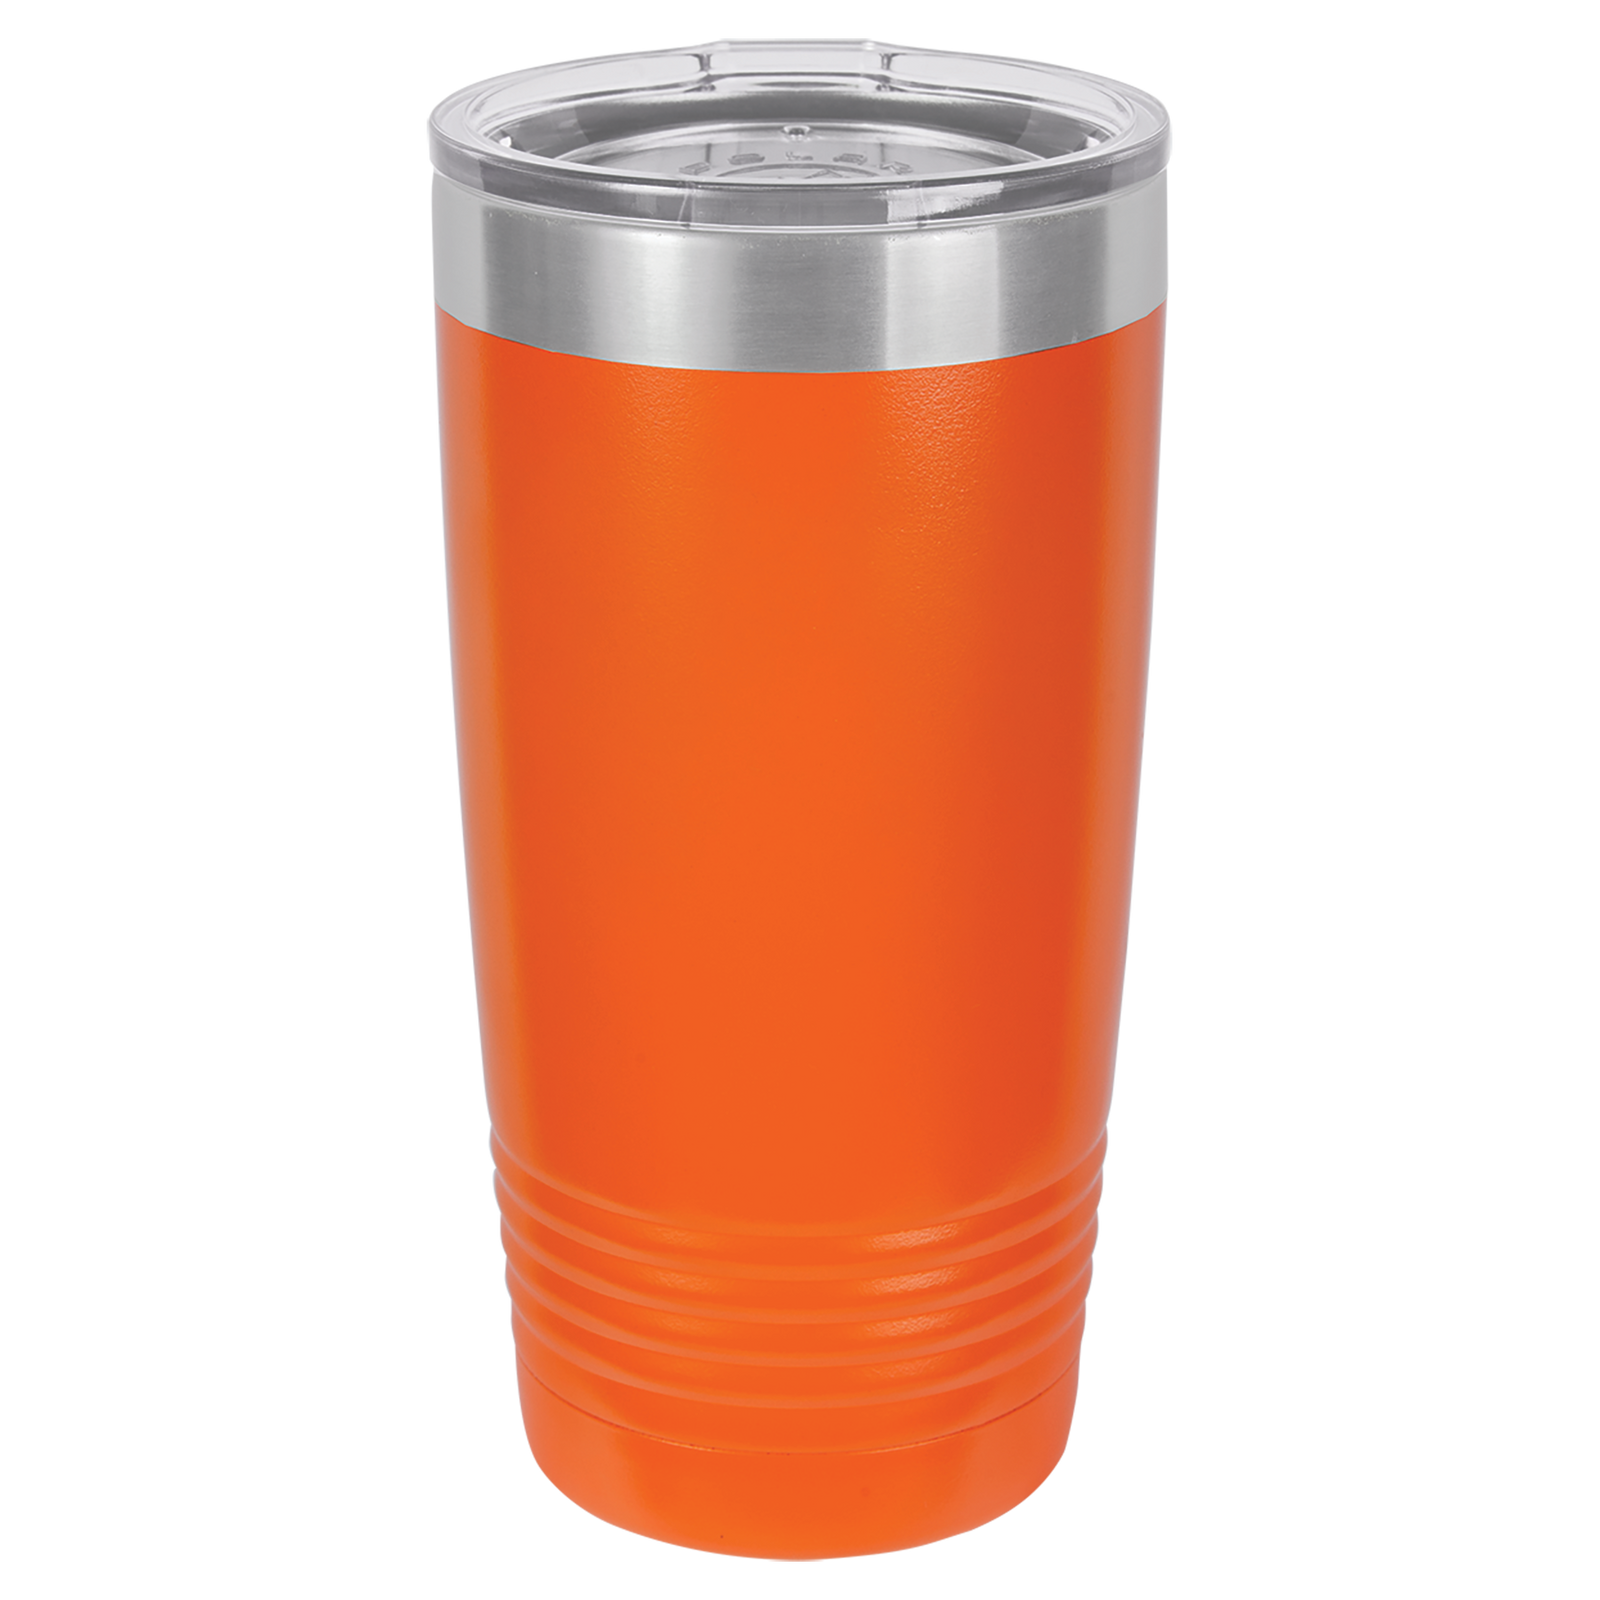 Of Course SIZE MATTERS No one wants a small DRINK! - Powder Coated Etched  Tumbler